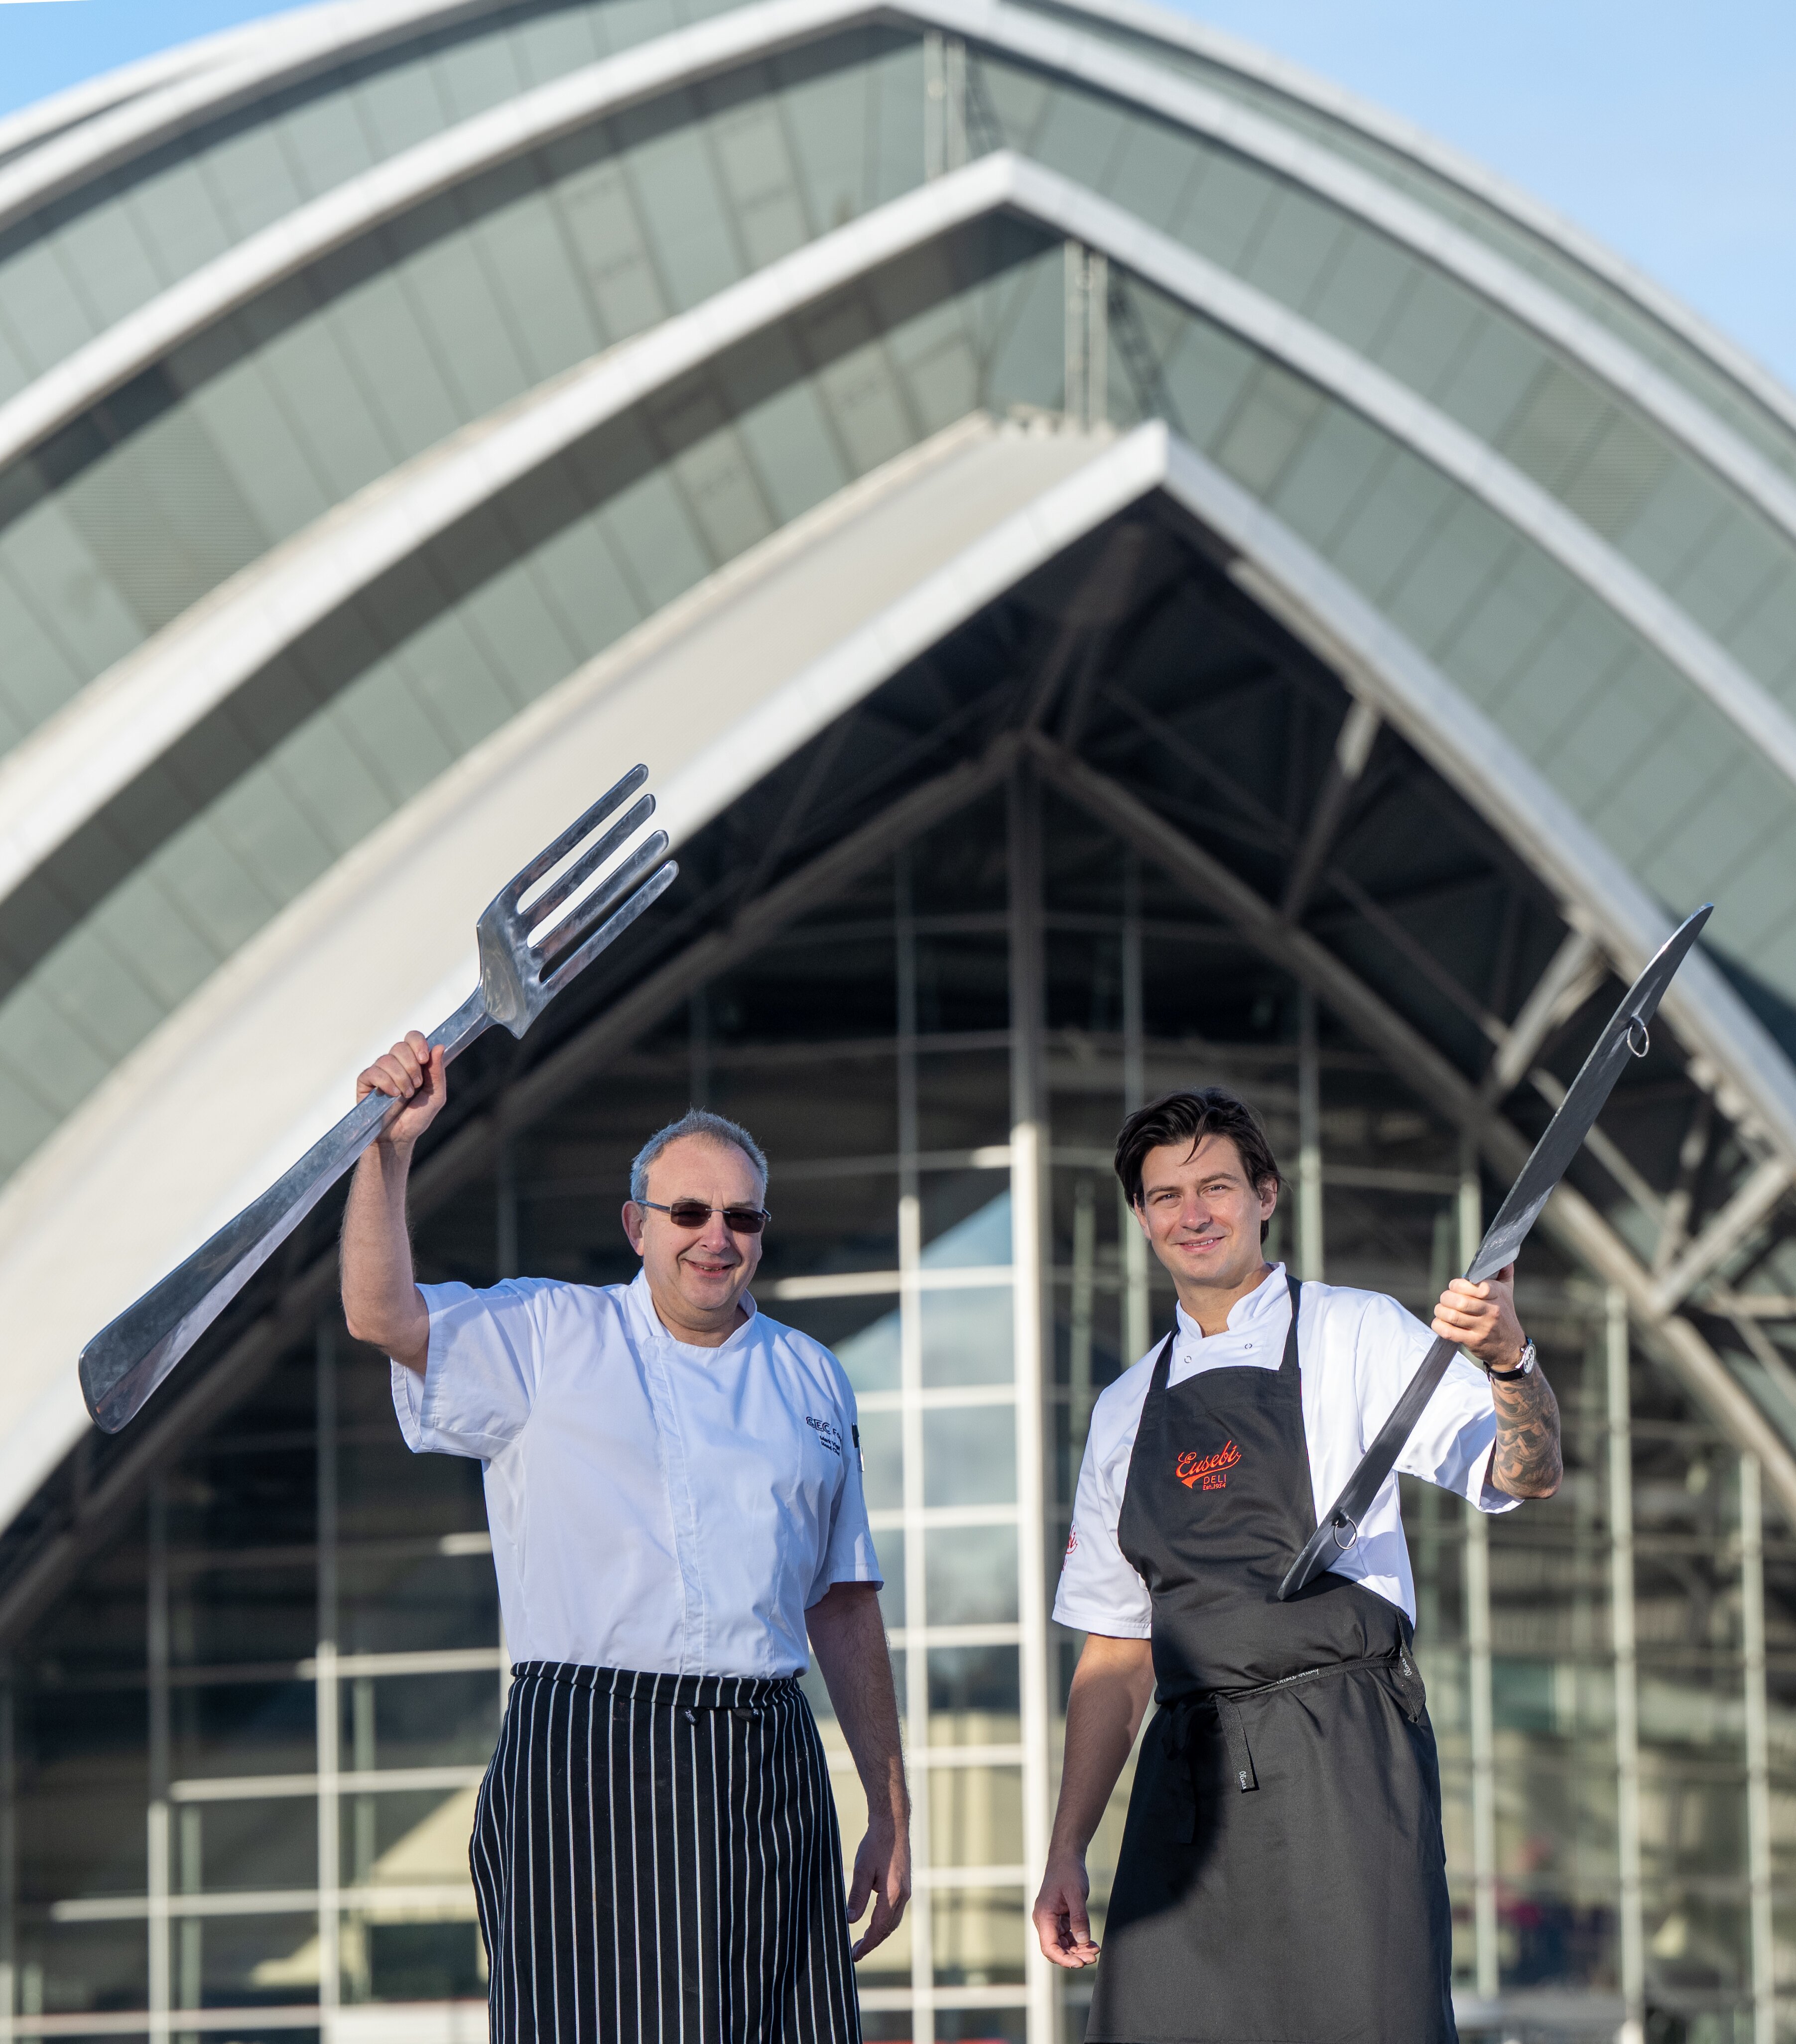 ScotHot returns to Glasgow in March 2023